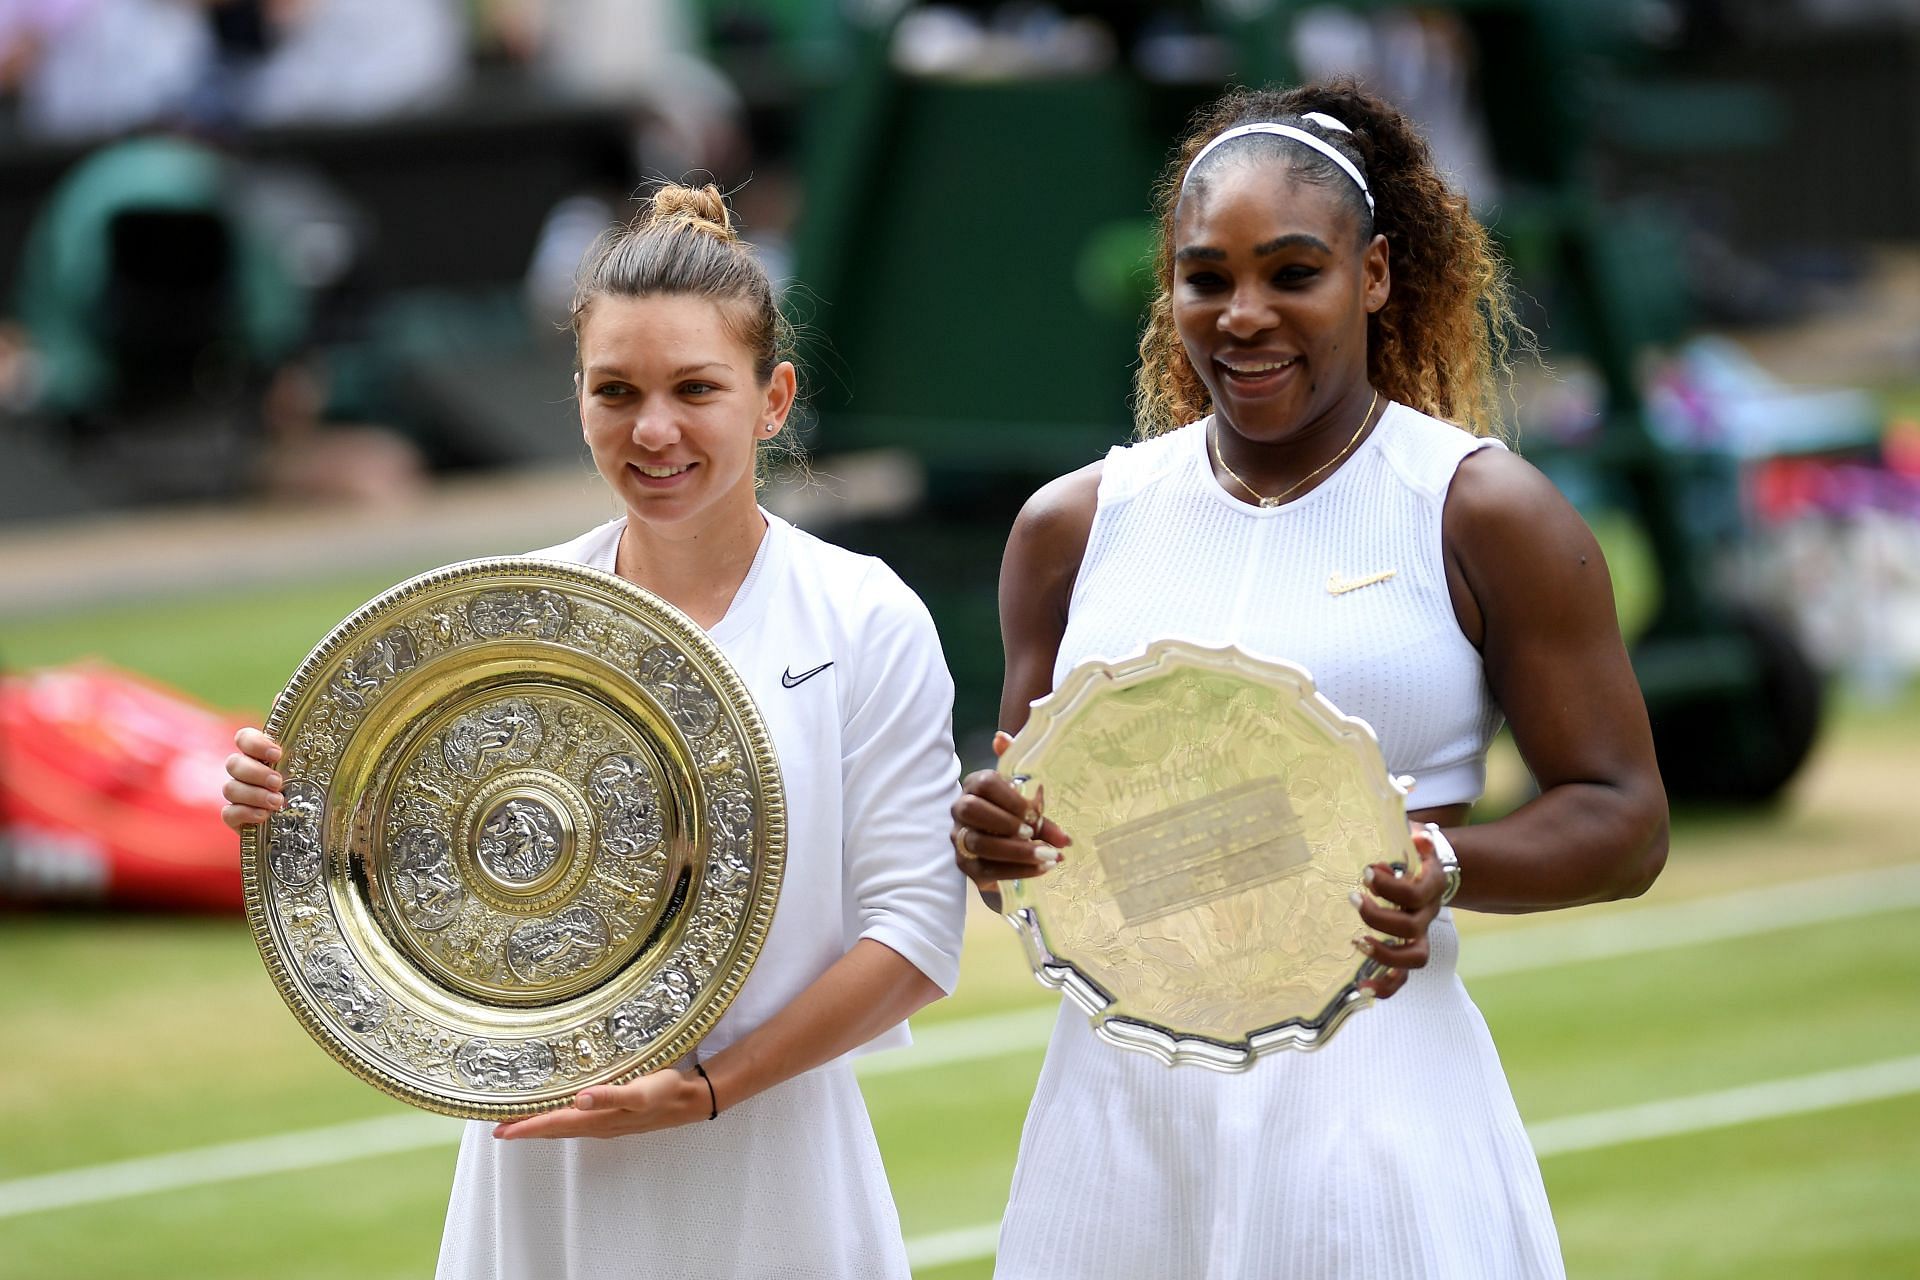 Simona Halep defeated the American in the Wimbledon 2019 final